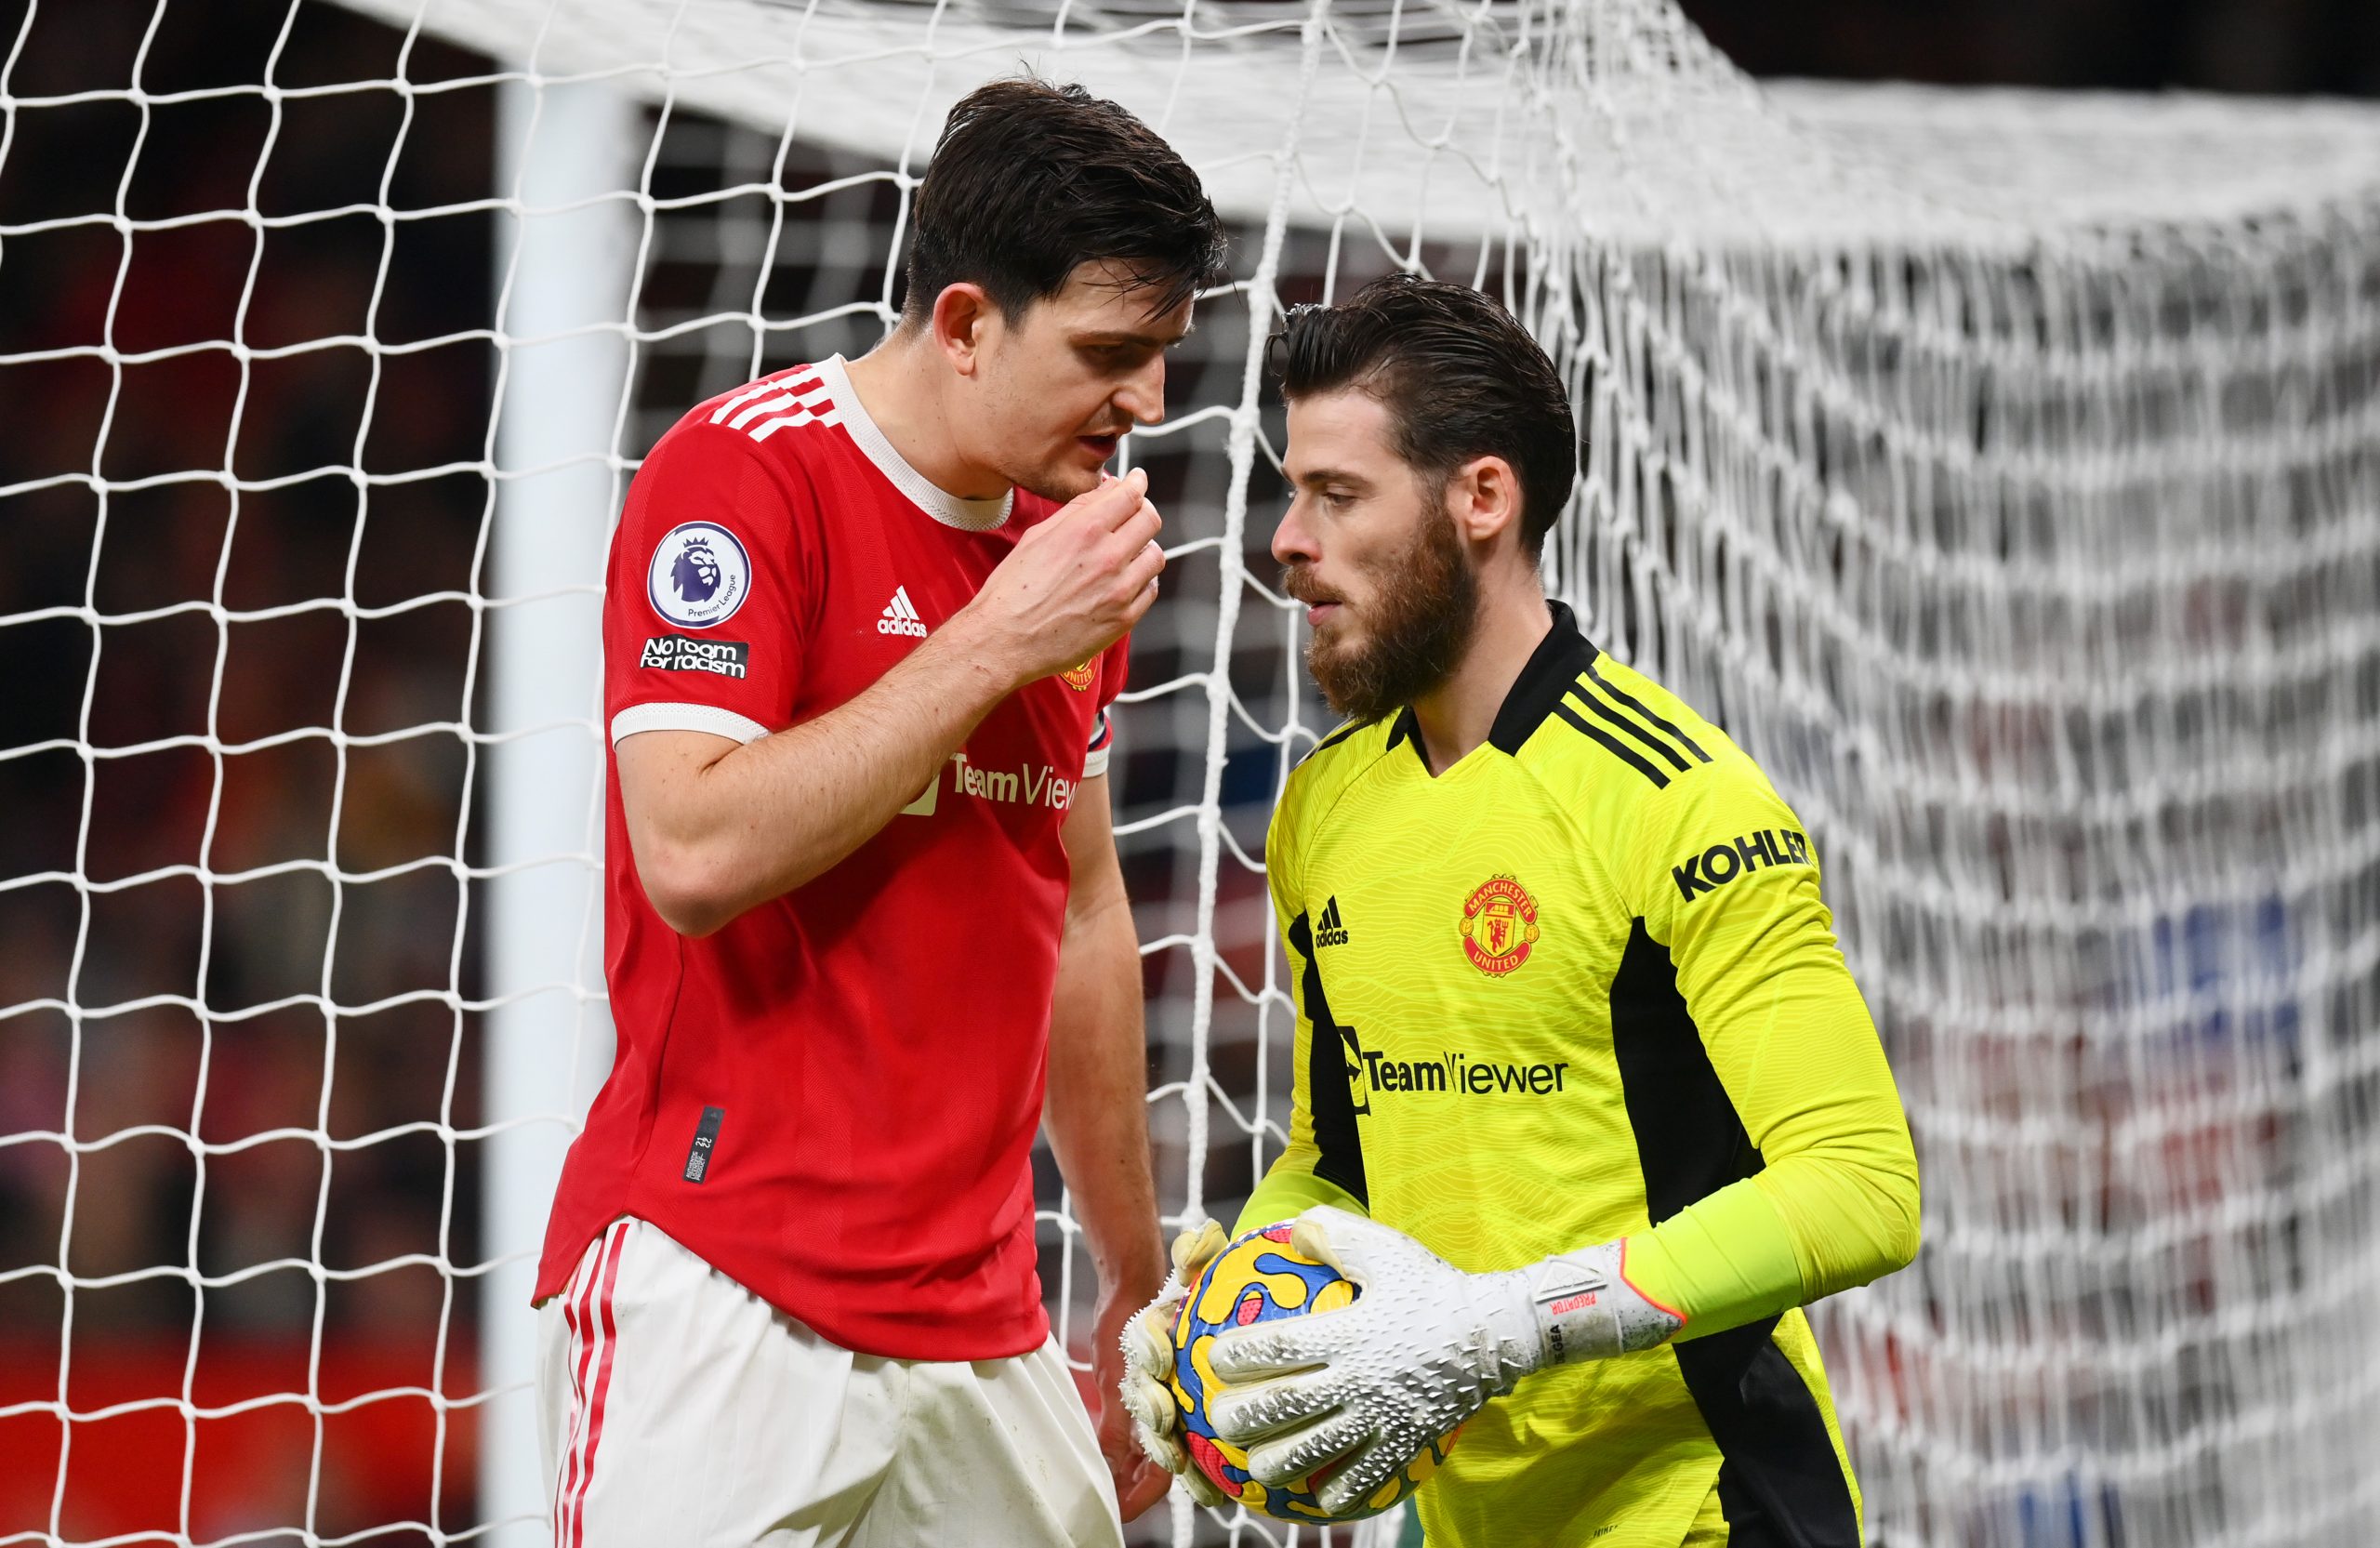 Harry Maguire conversing with Manchester United teammate, David de Gea. (